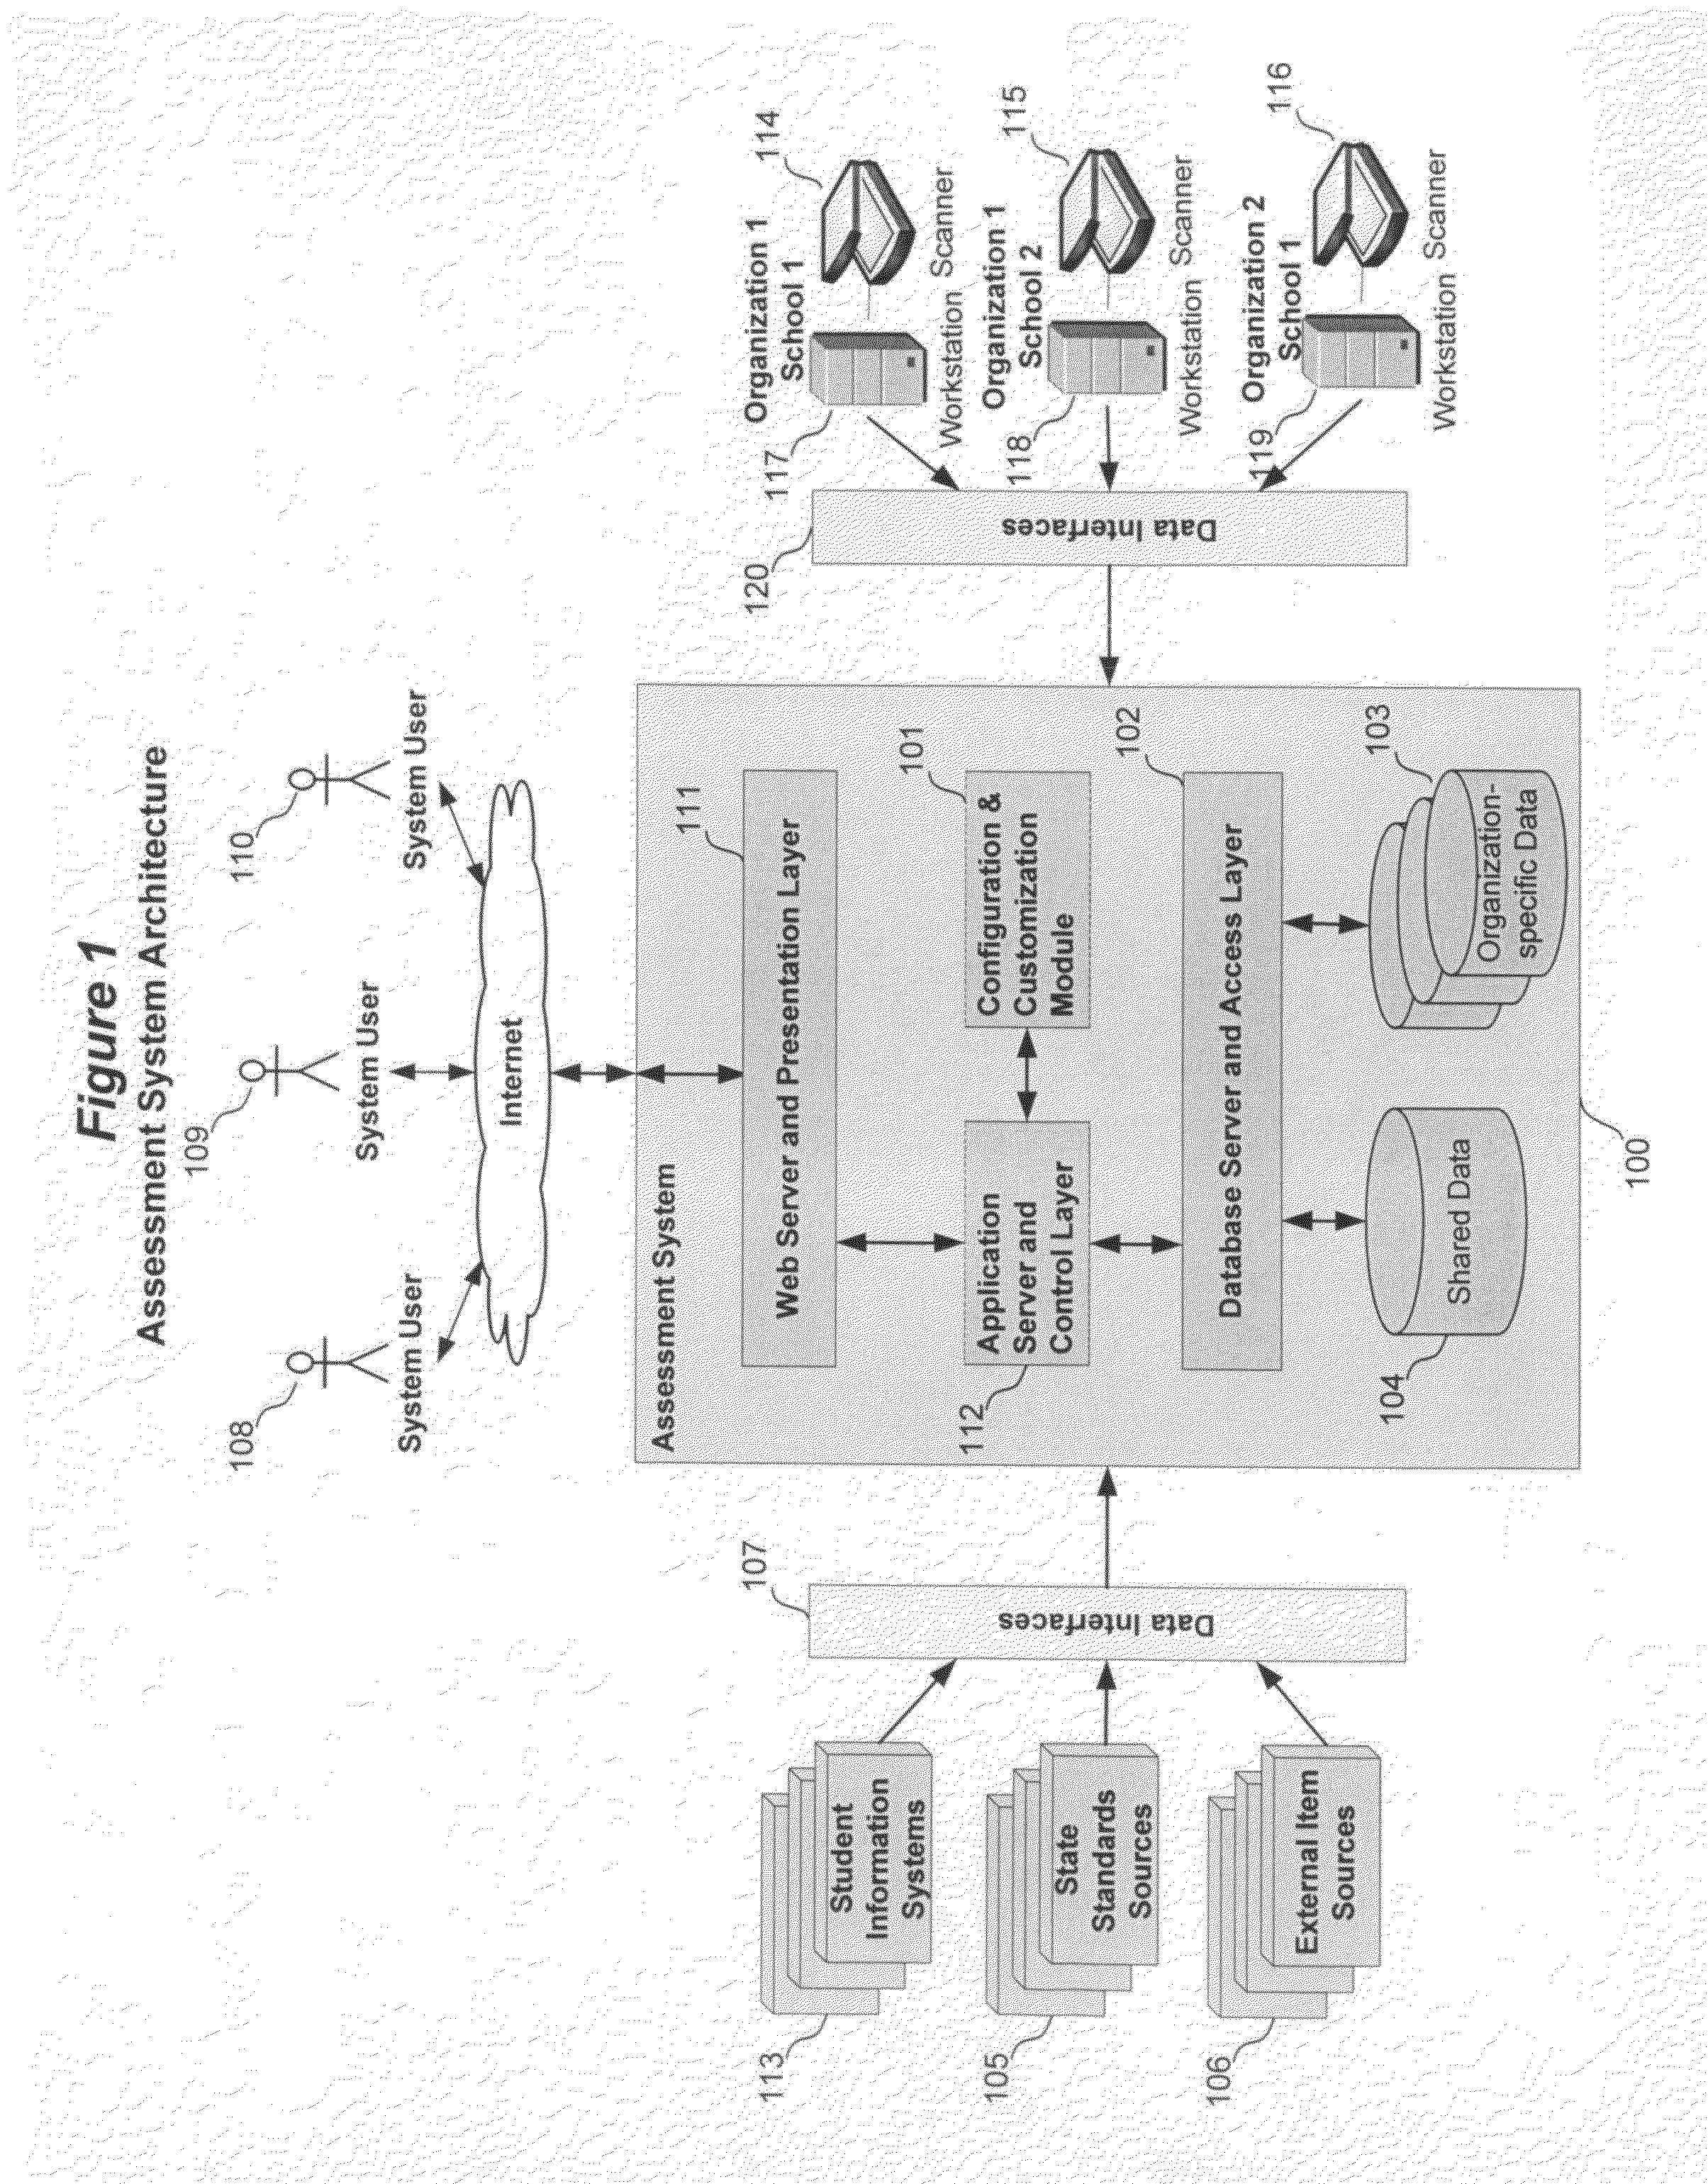 System and method for using interim-assessment data for instructional decision-making